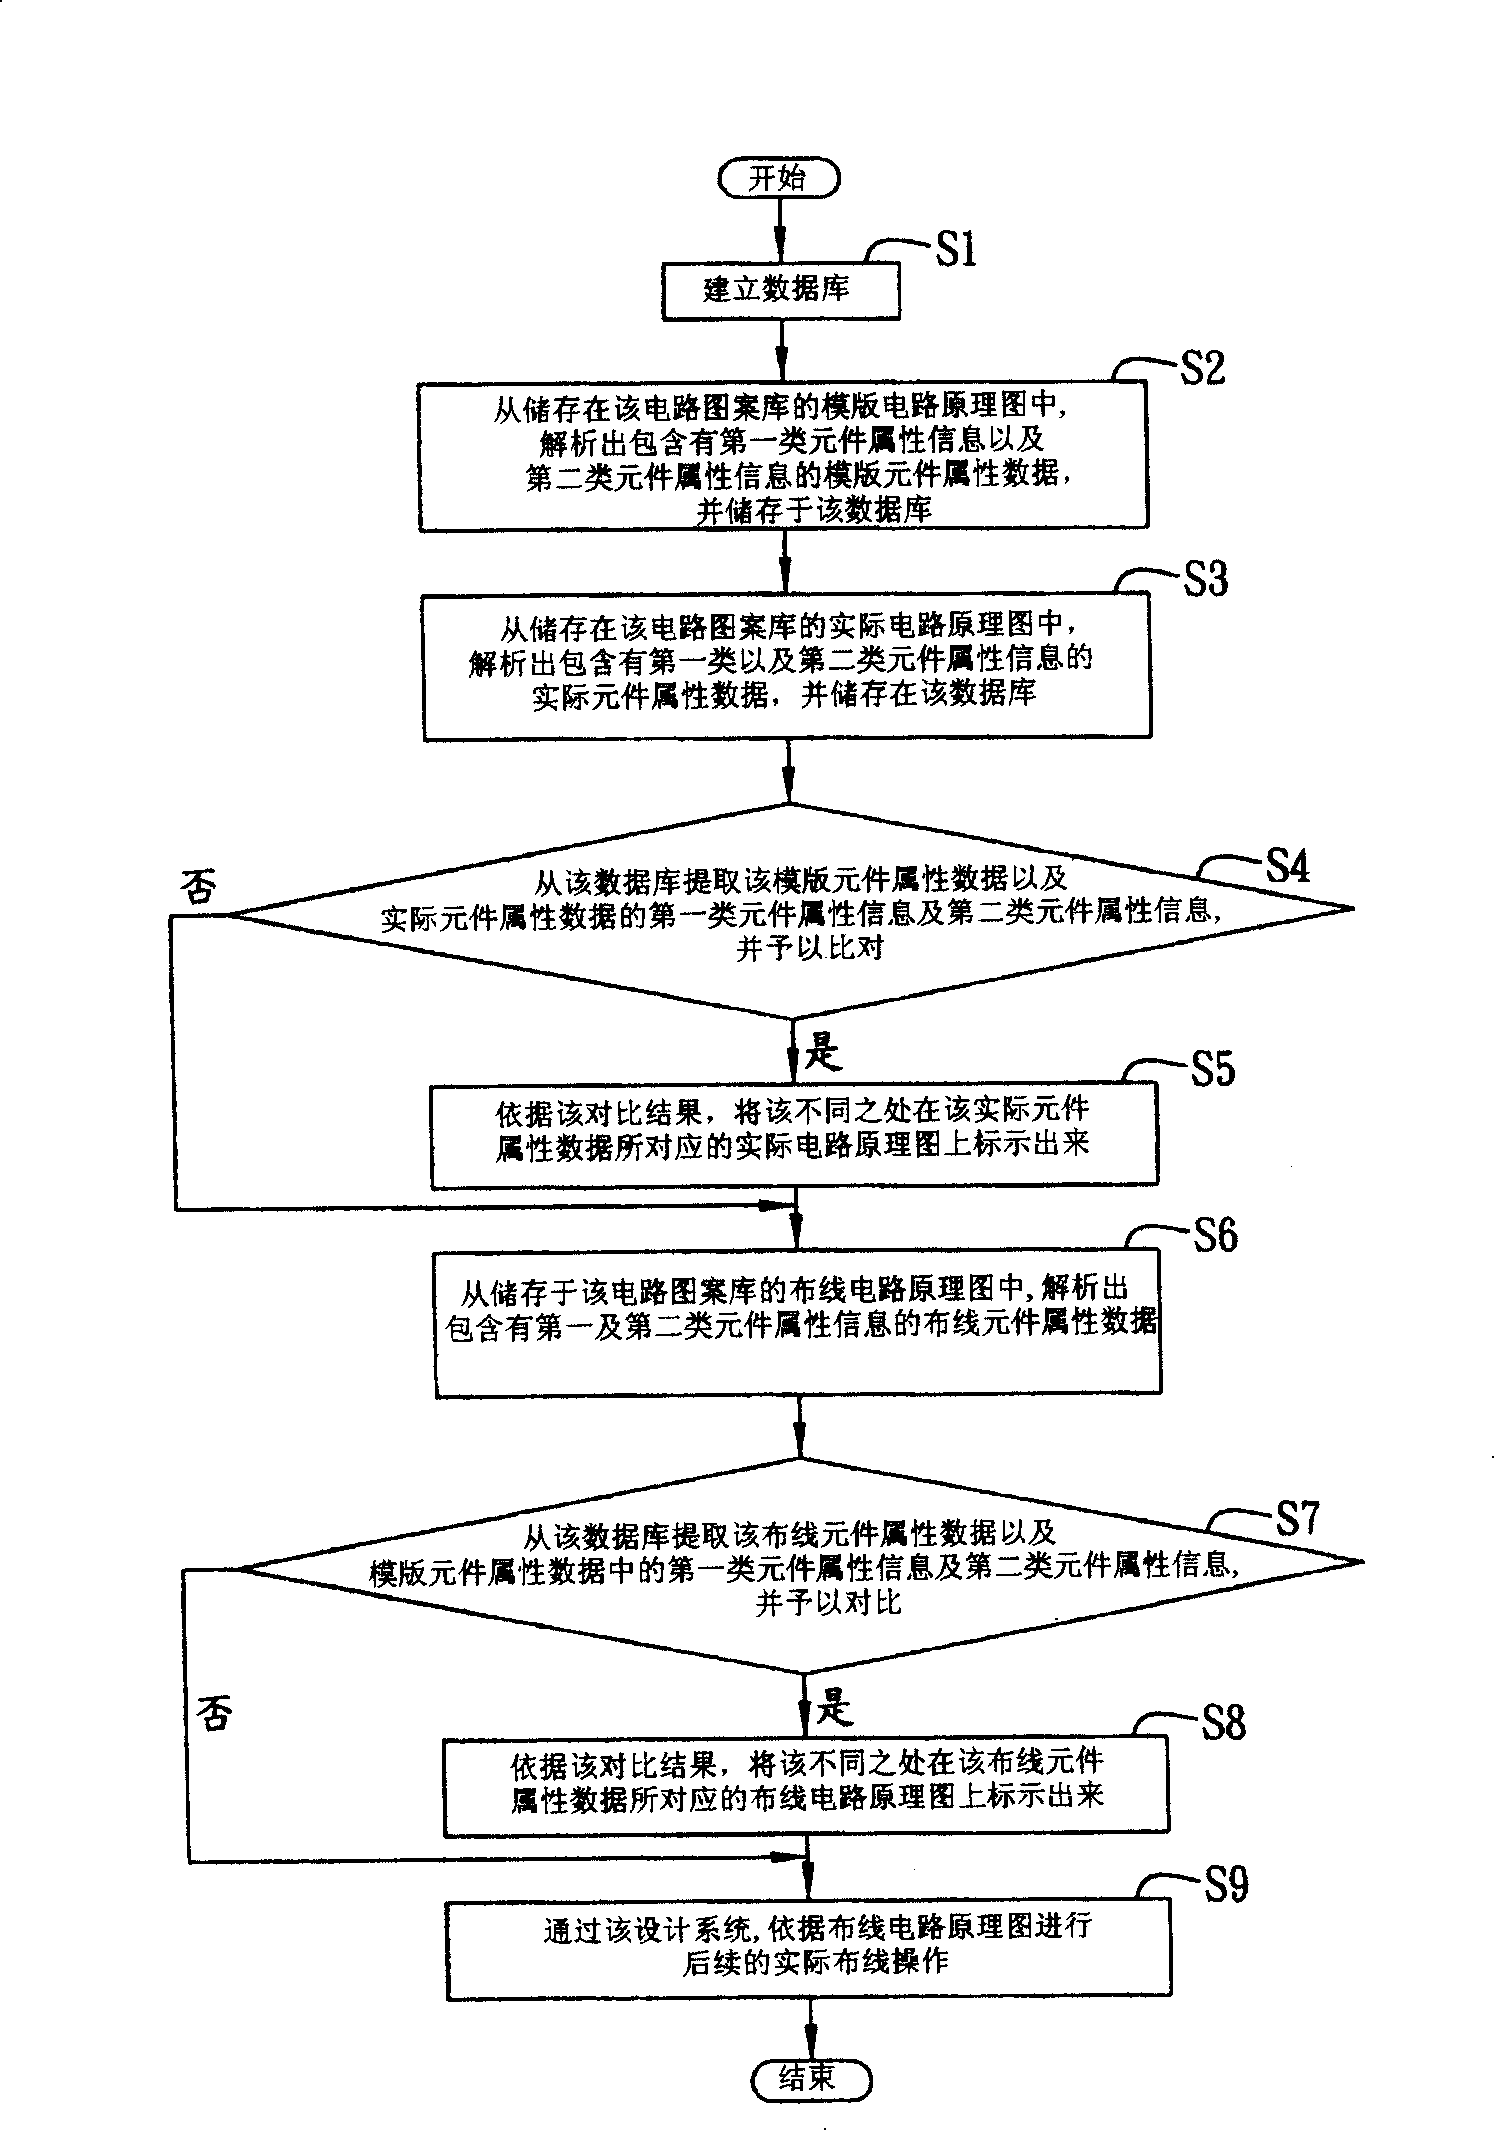 Circuit connection calibration system and method